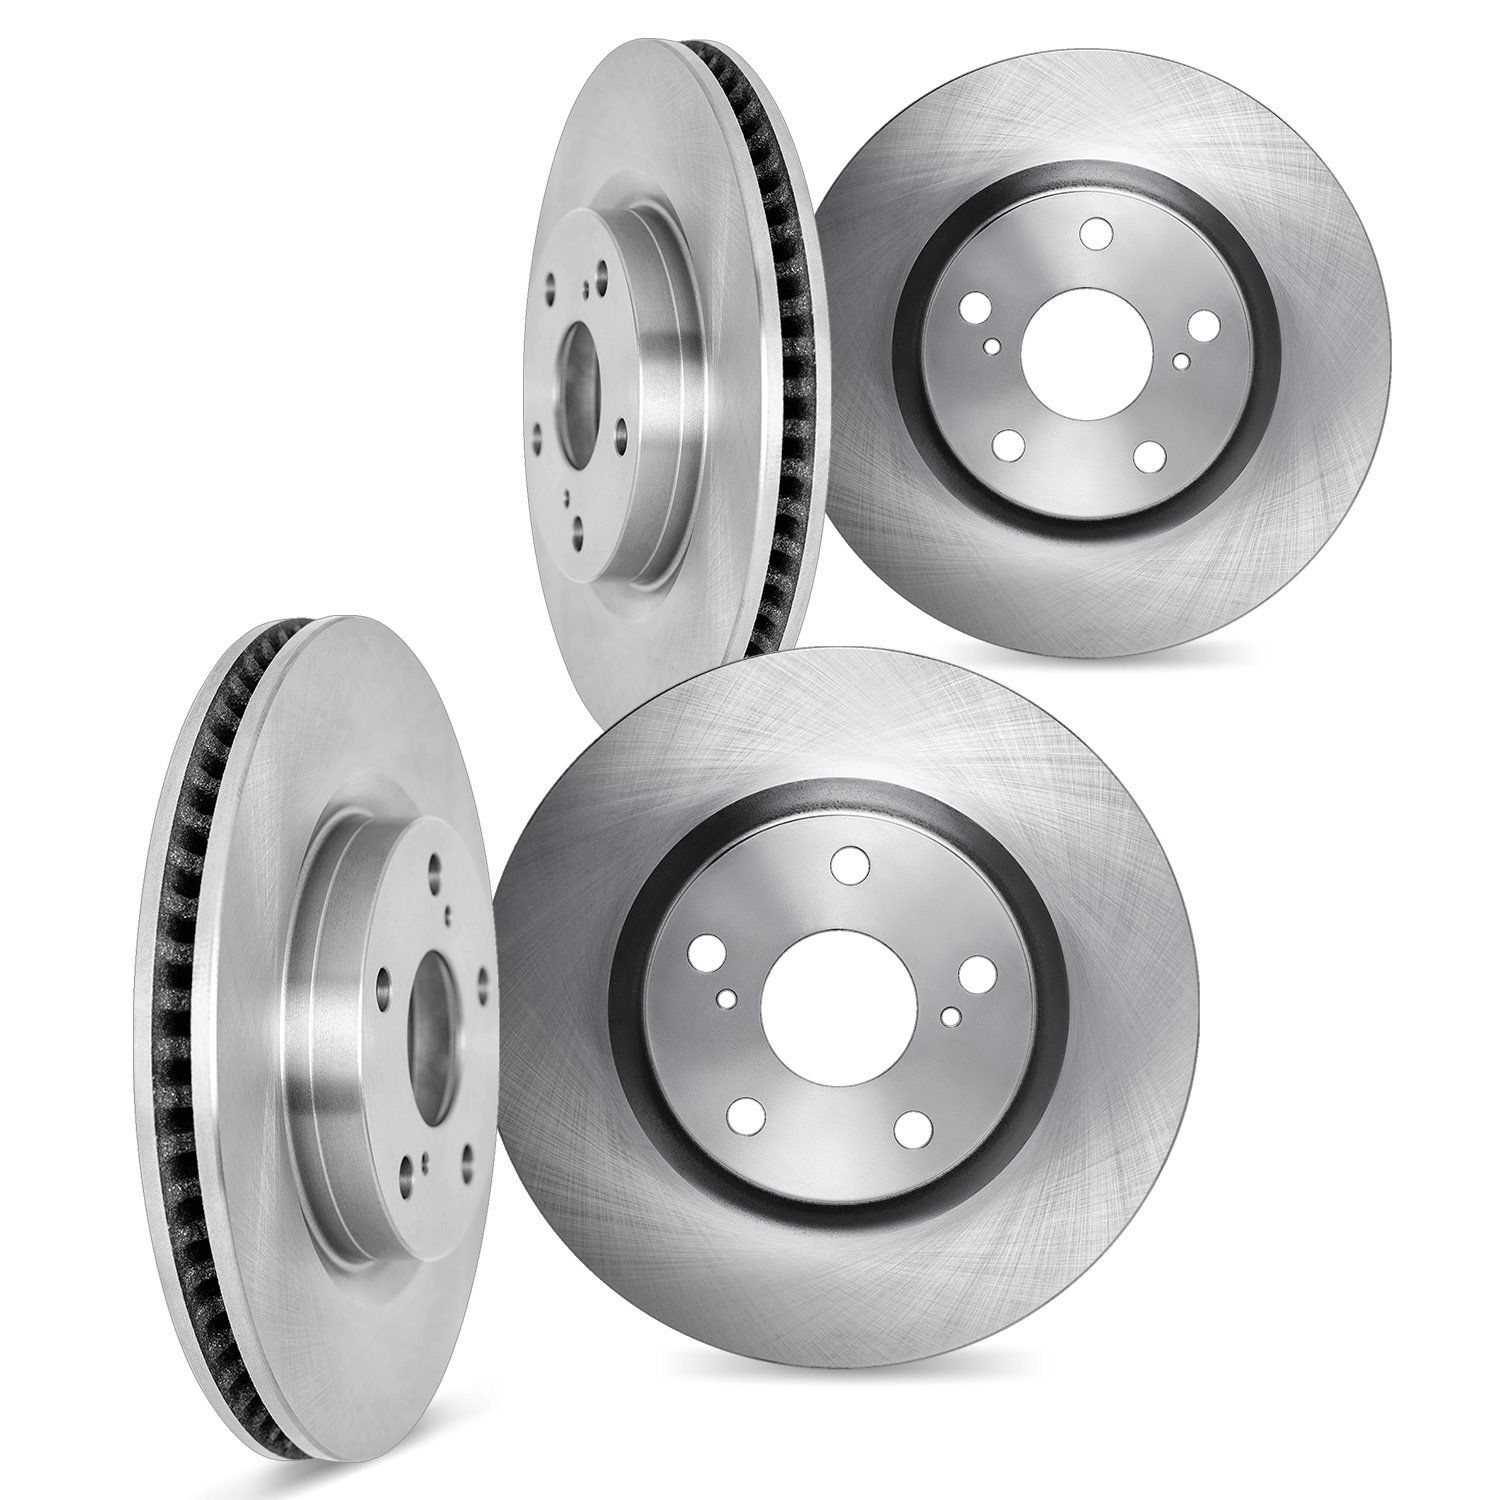 6004-75022 Brake Rotors, Fits Select Lexus/Toyota/Scion, Position: Front and Rear